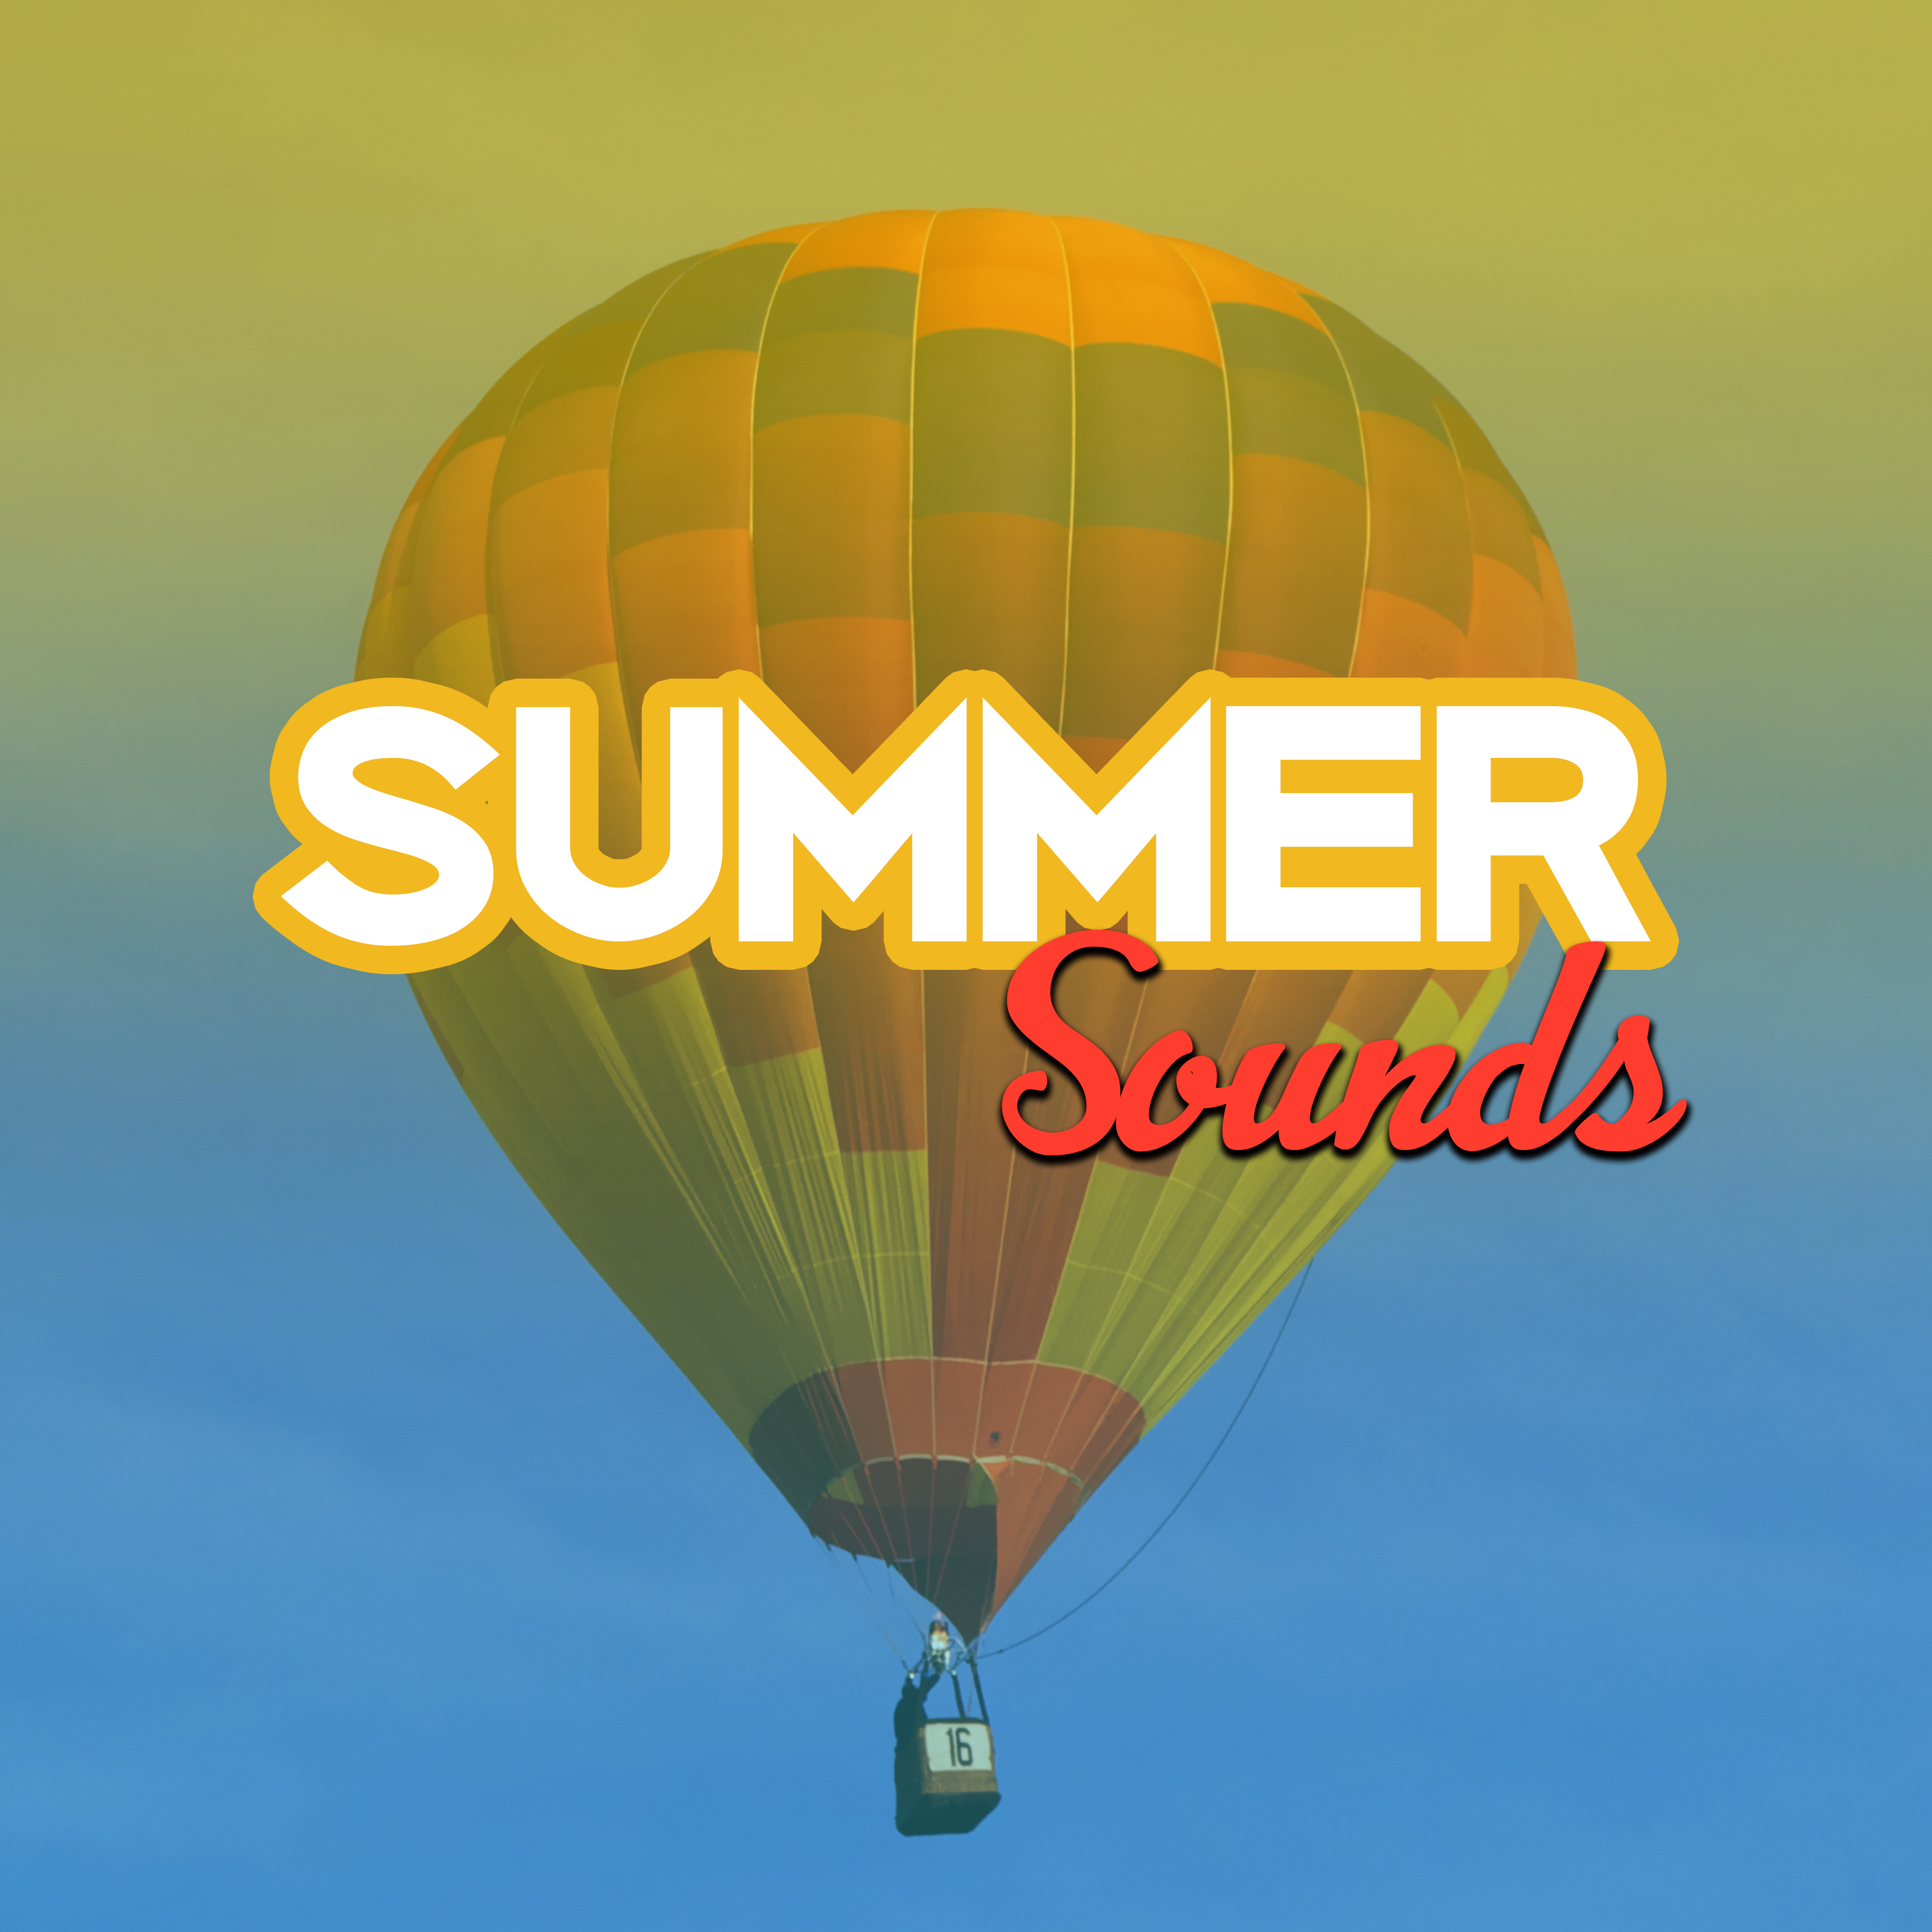 Summer Sounds – Best Chill Out, Pure Rest, Summer Chill, Beach Music, Stress Relief, Ibiza Lounge